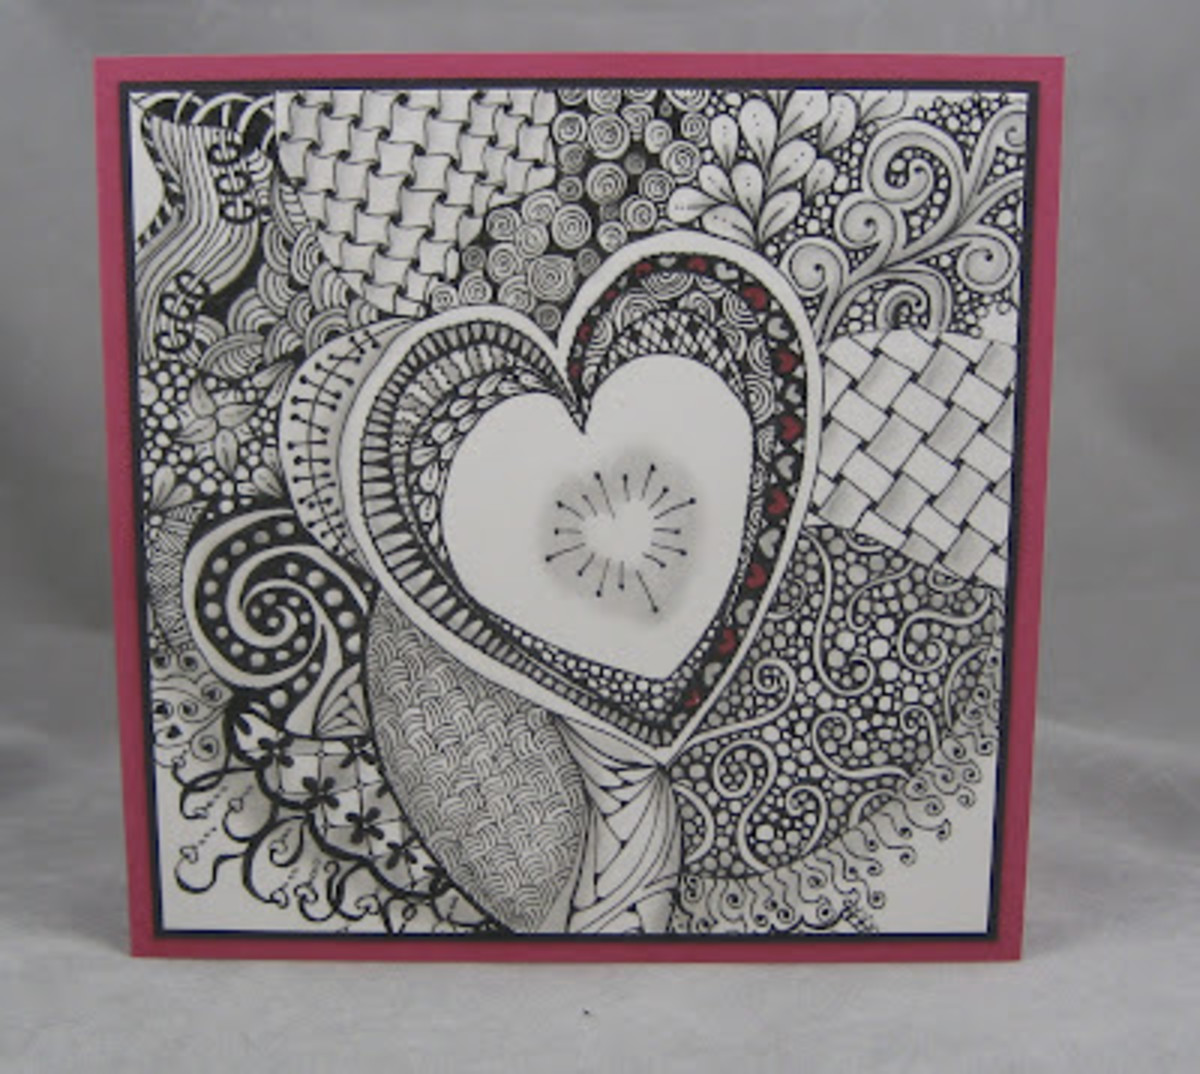 Leave it plain or add some color. This zentangle card is sure to please.